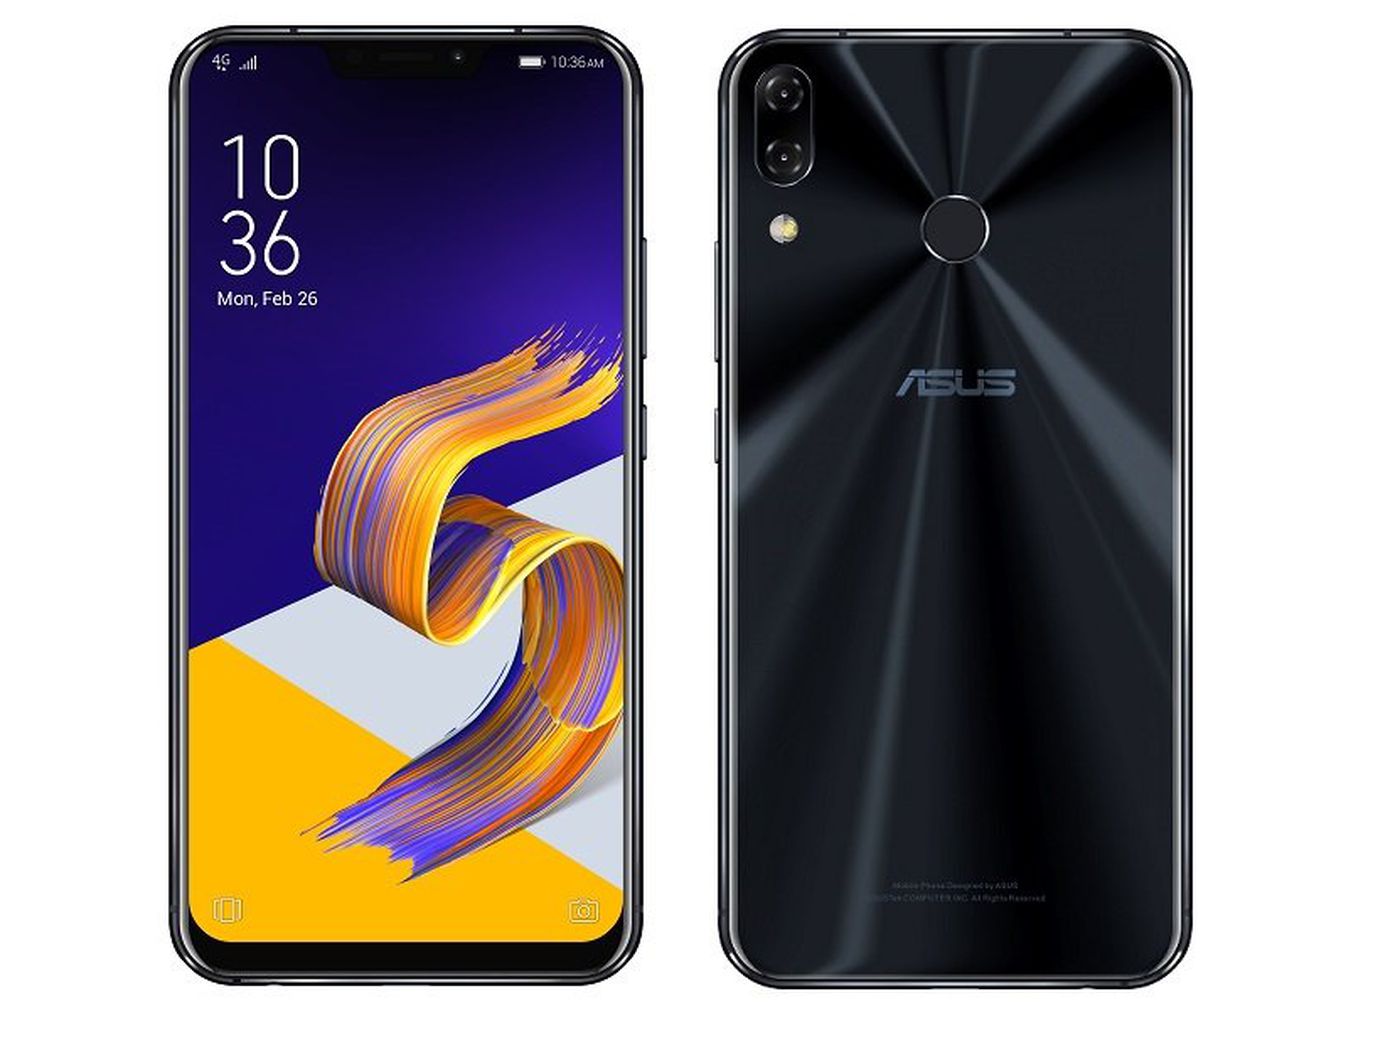 Asus' Zenfone 5Z is up for preorder and available on August 6th 